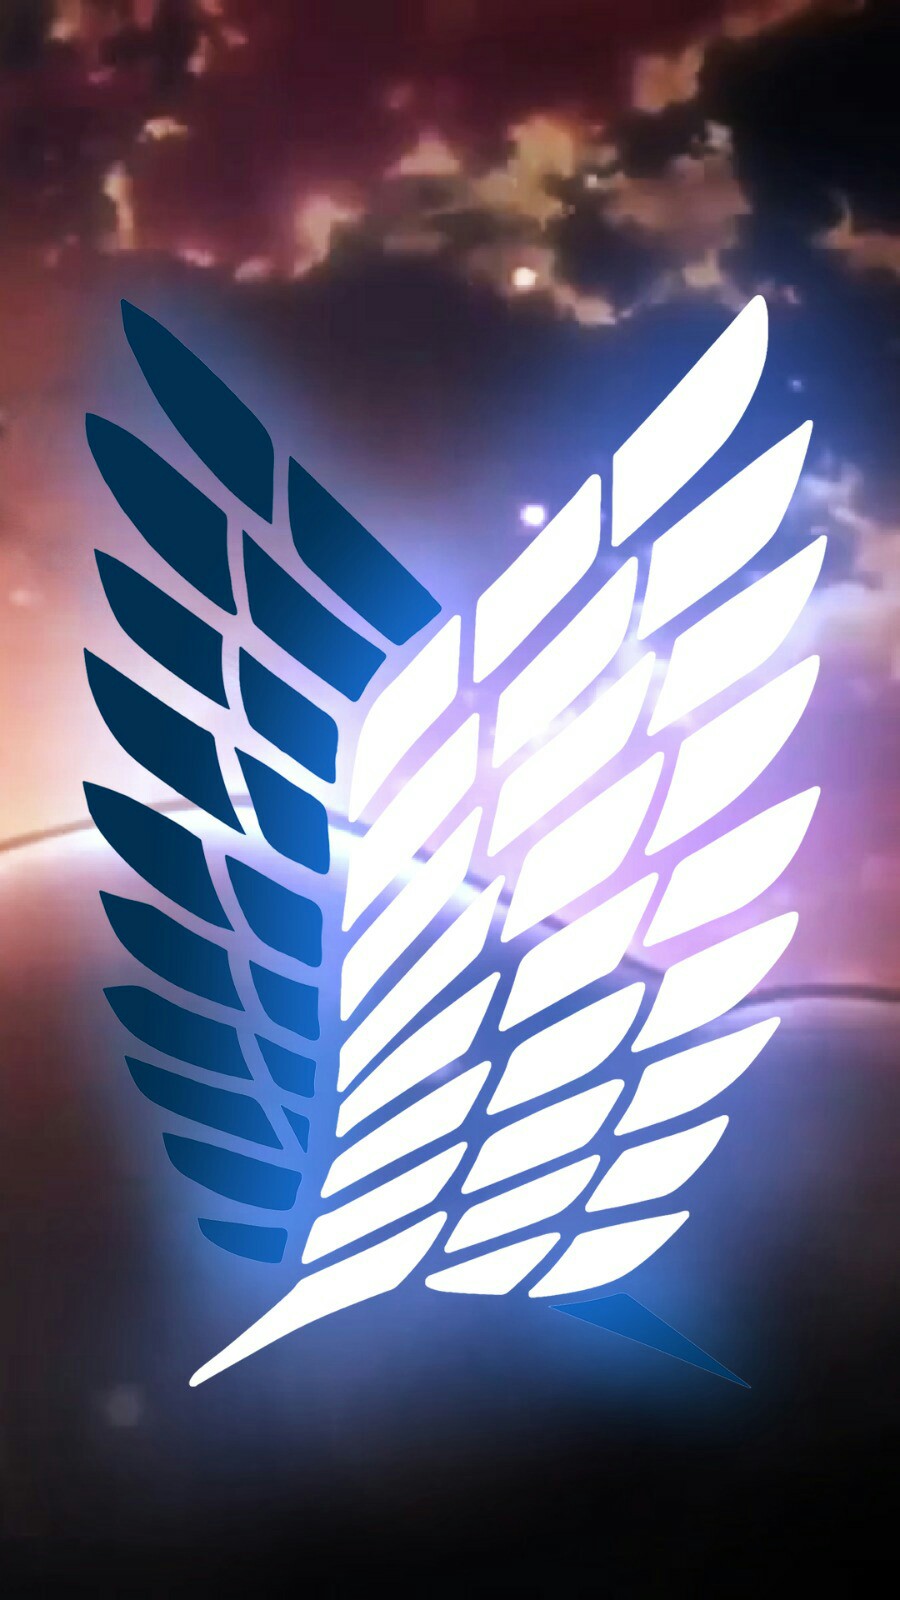 Need a good Wings of Liberty's cellphone wallpaper!!!